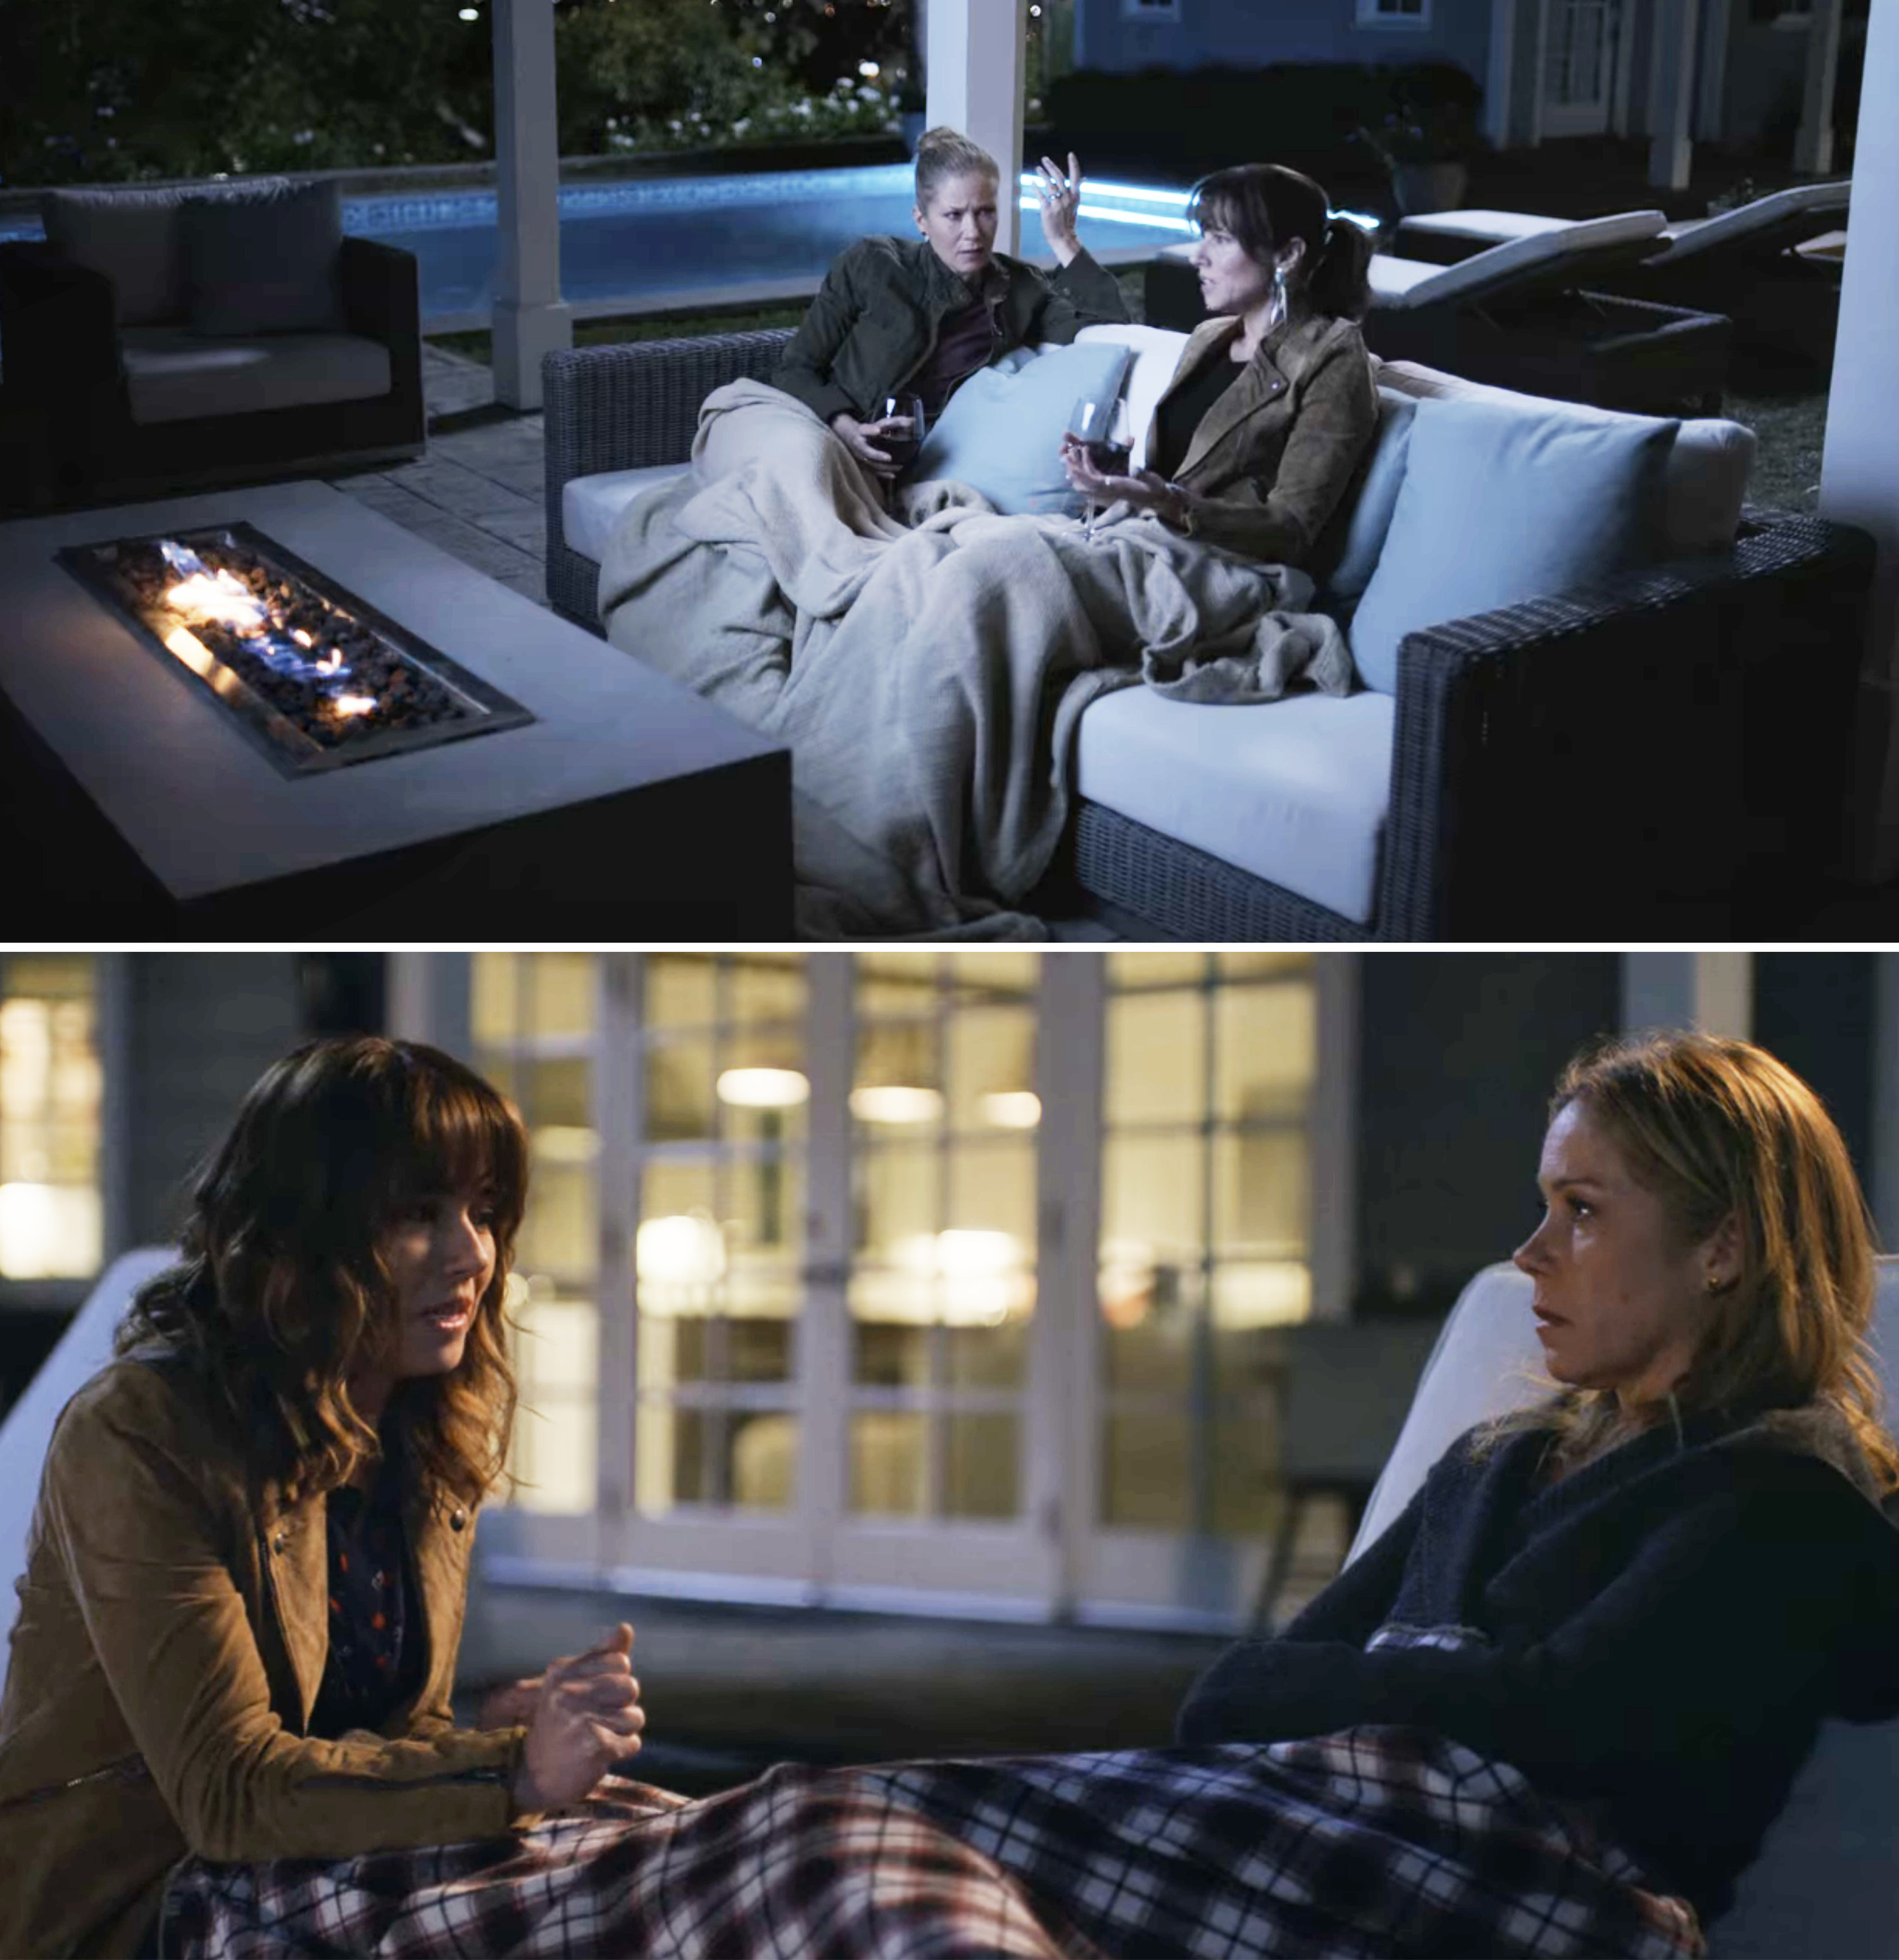 Scenes with Christina and Linda sitting on a couch